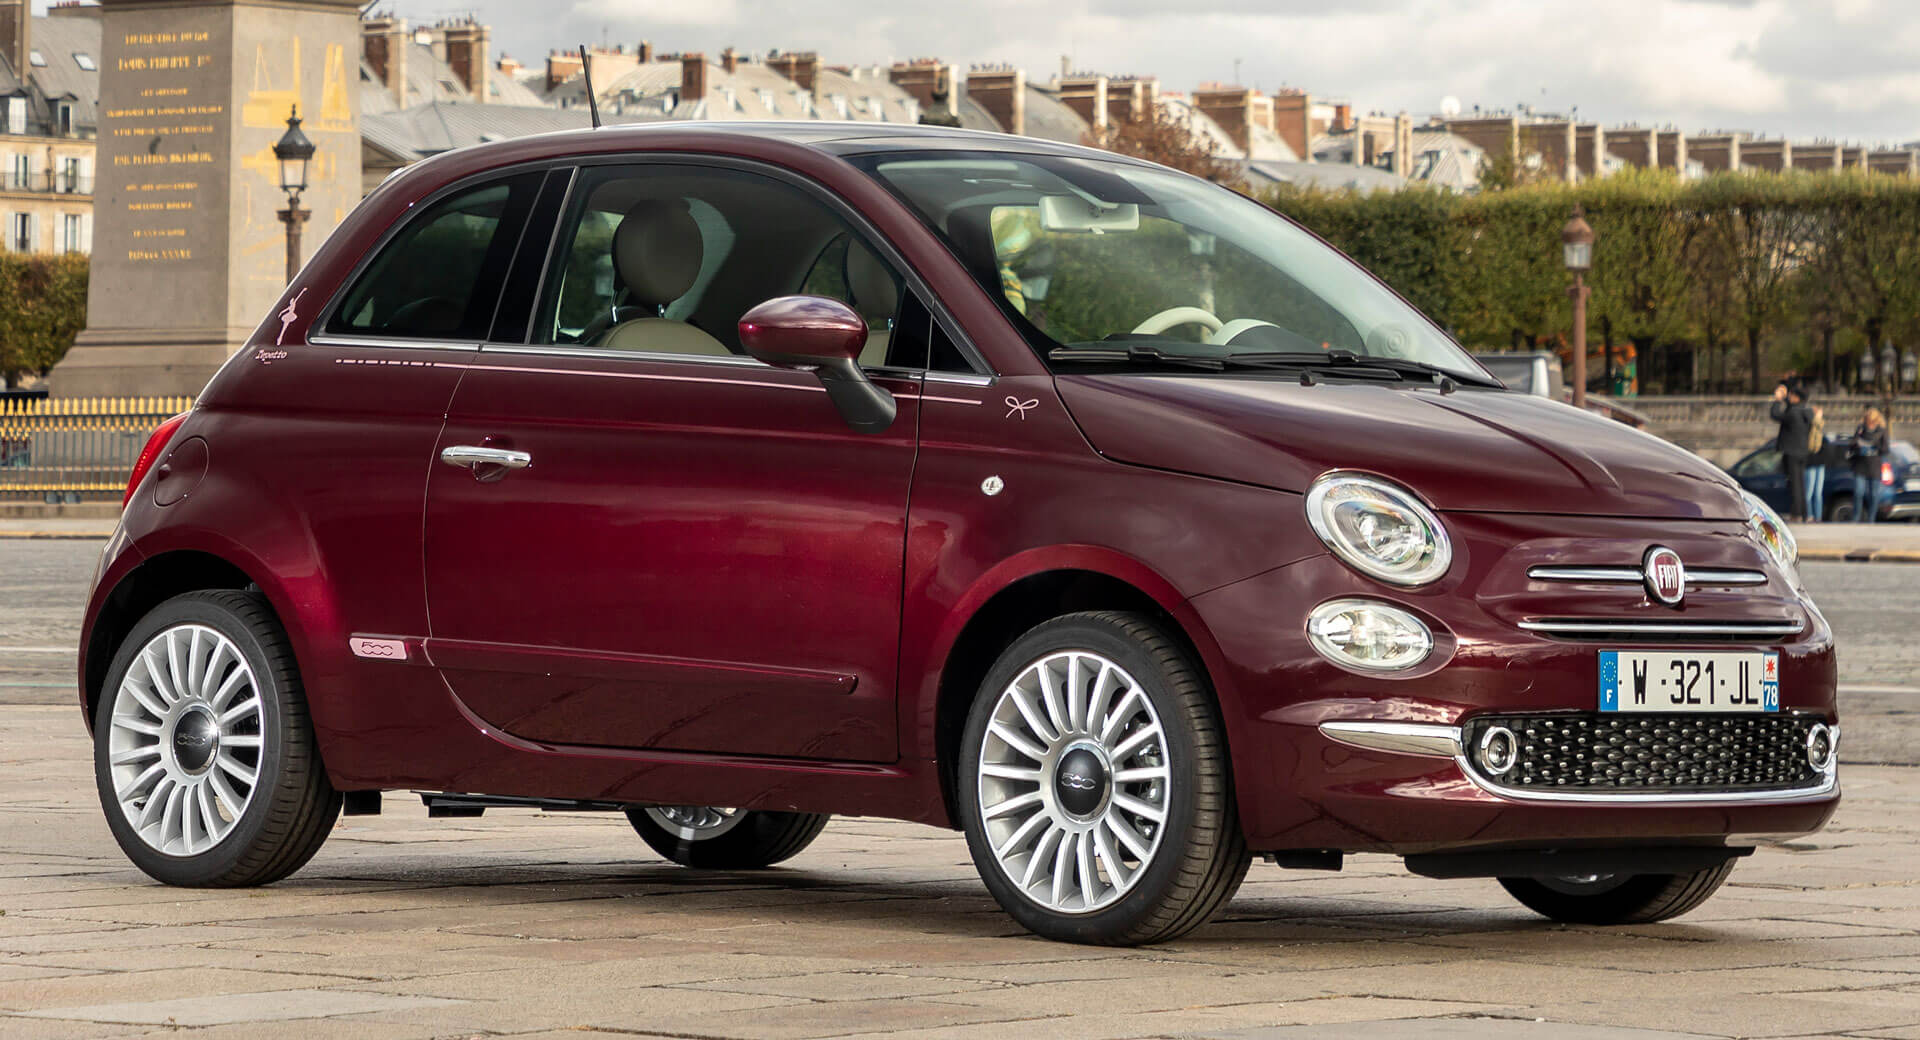 Fiat 500 By Repetto Is A Special Edition Model Priced From €18,490 |  Carscoops